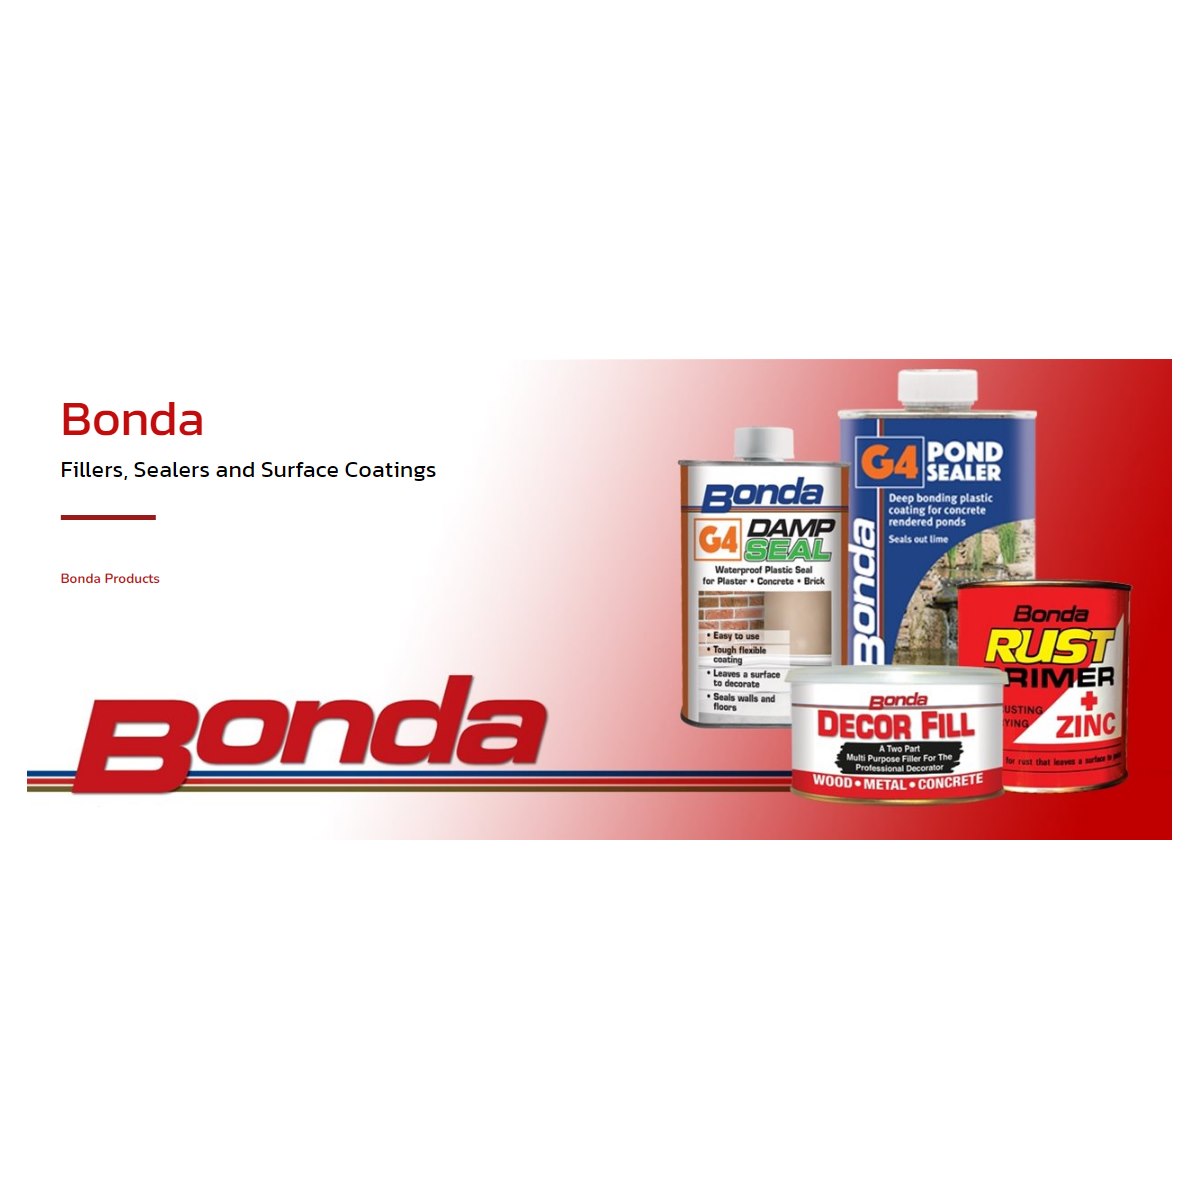 Where to Buy Bonda Products Online